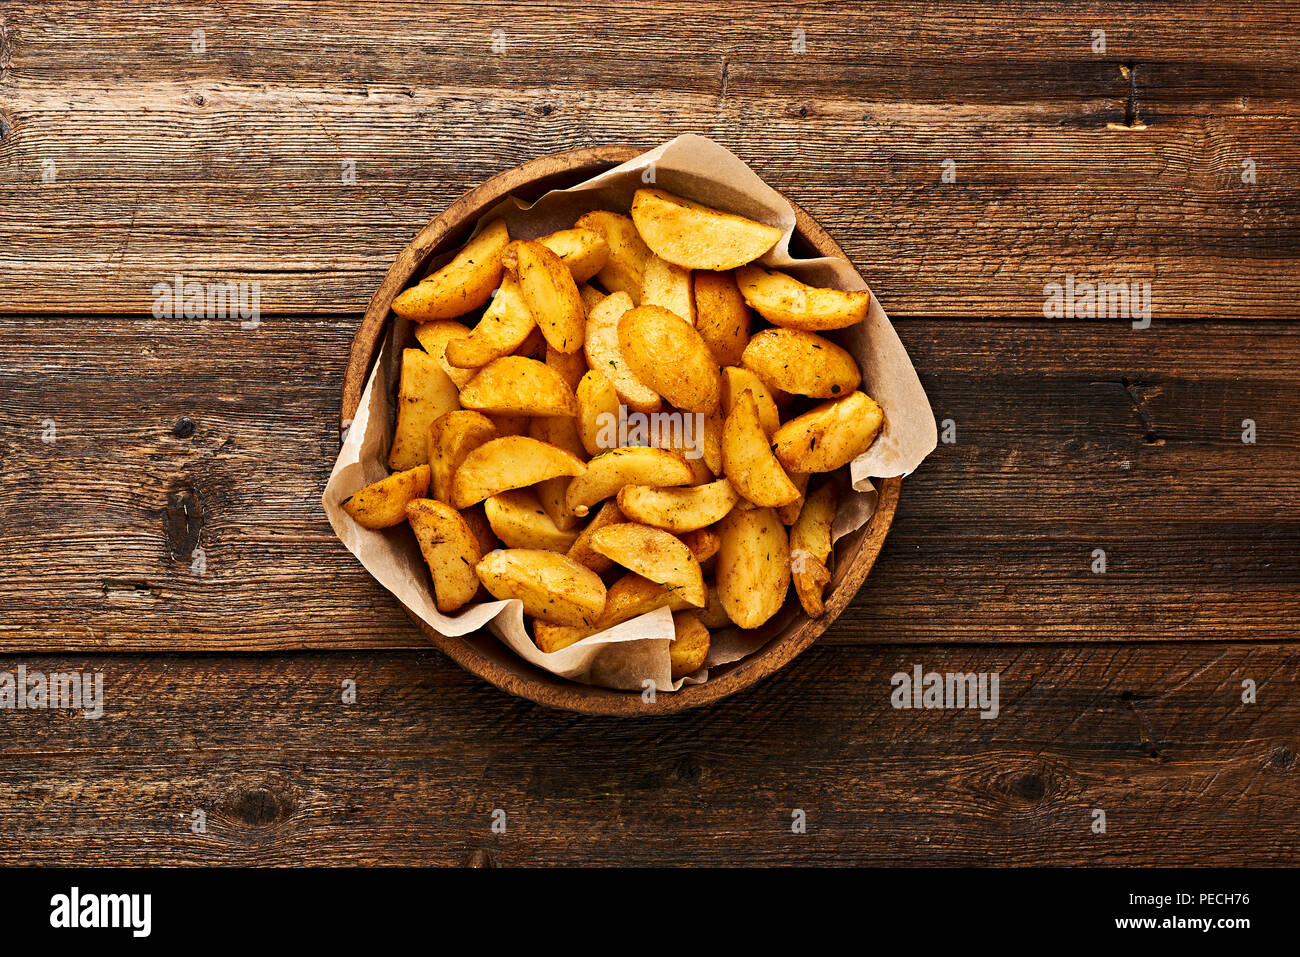 Roasted potato in bowl on wooden table with copy space. Stock Photo